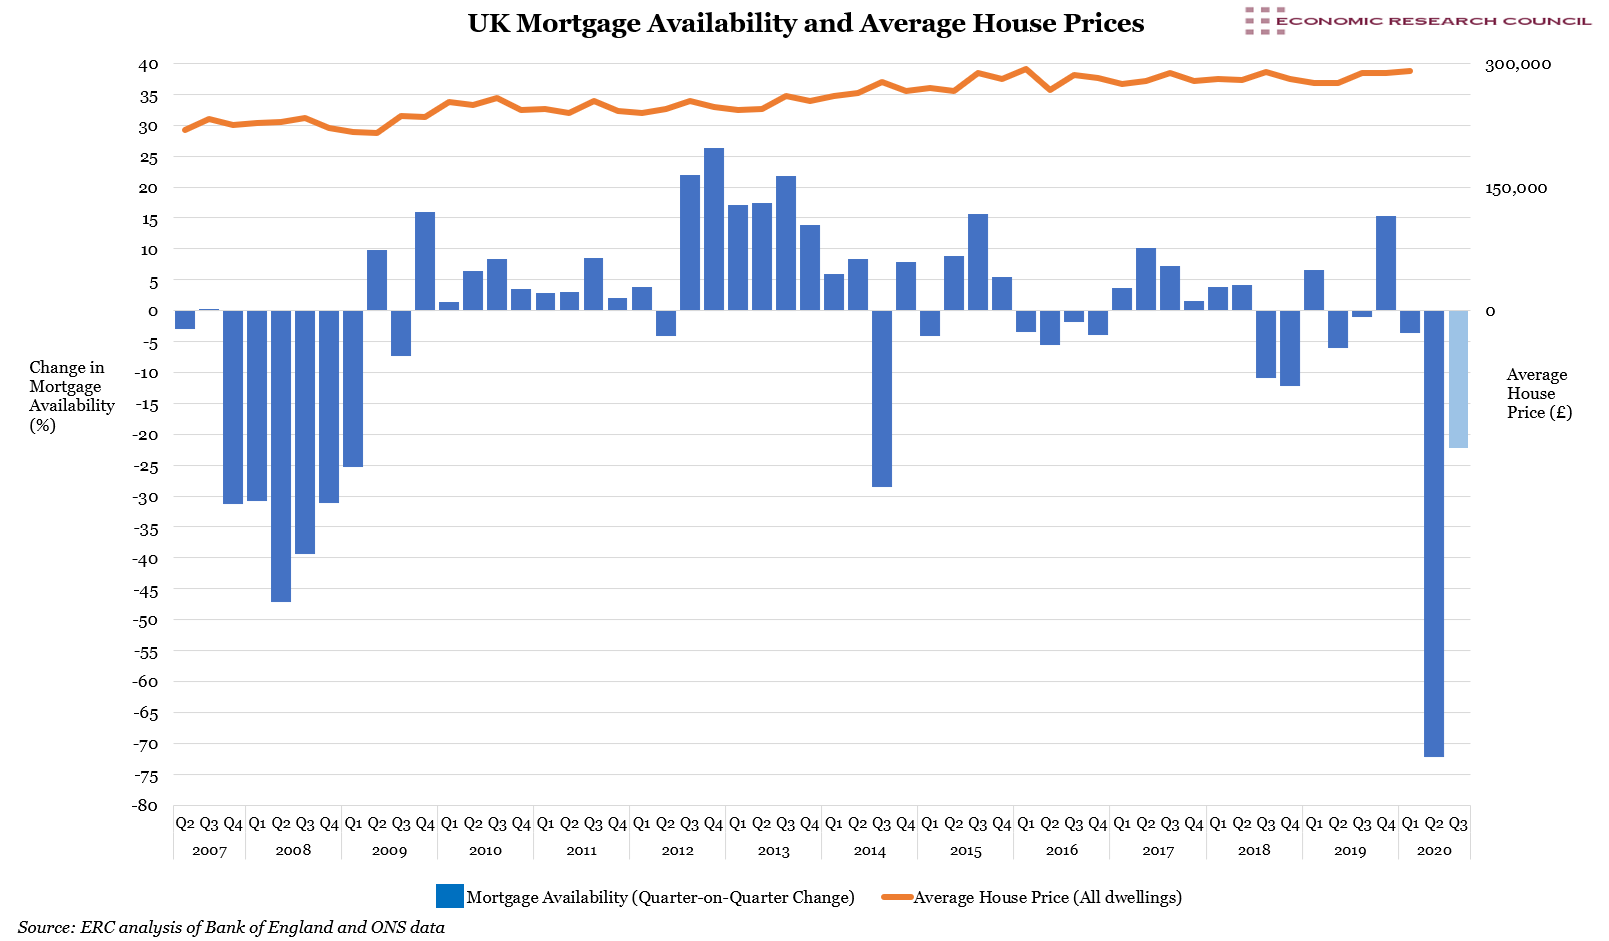 UK Mortgage Availability and Average House Prices